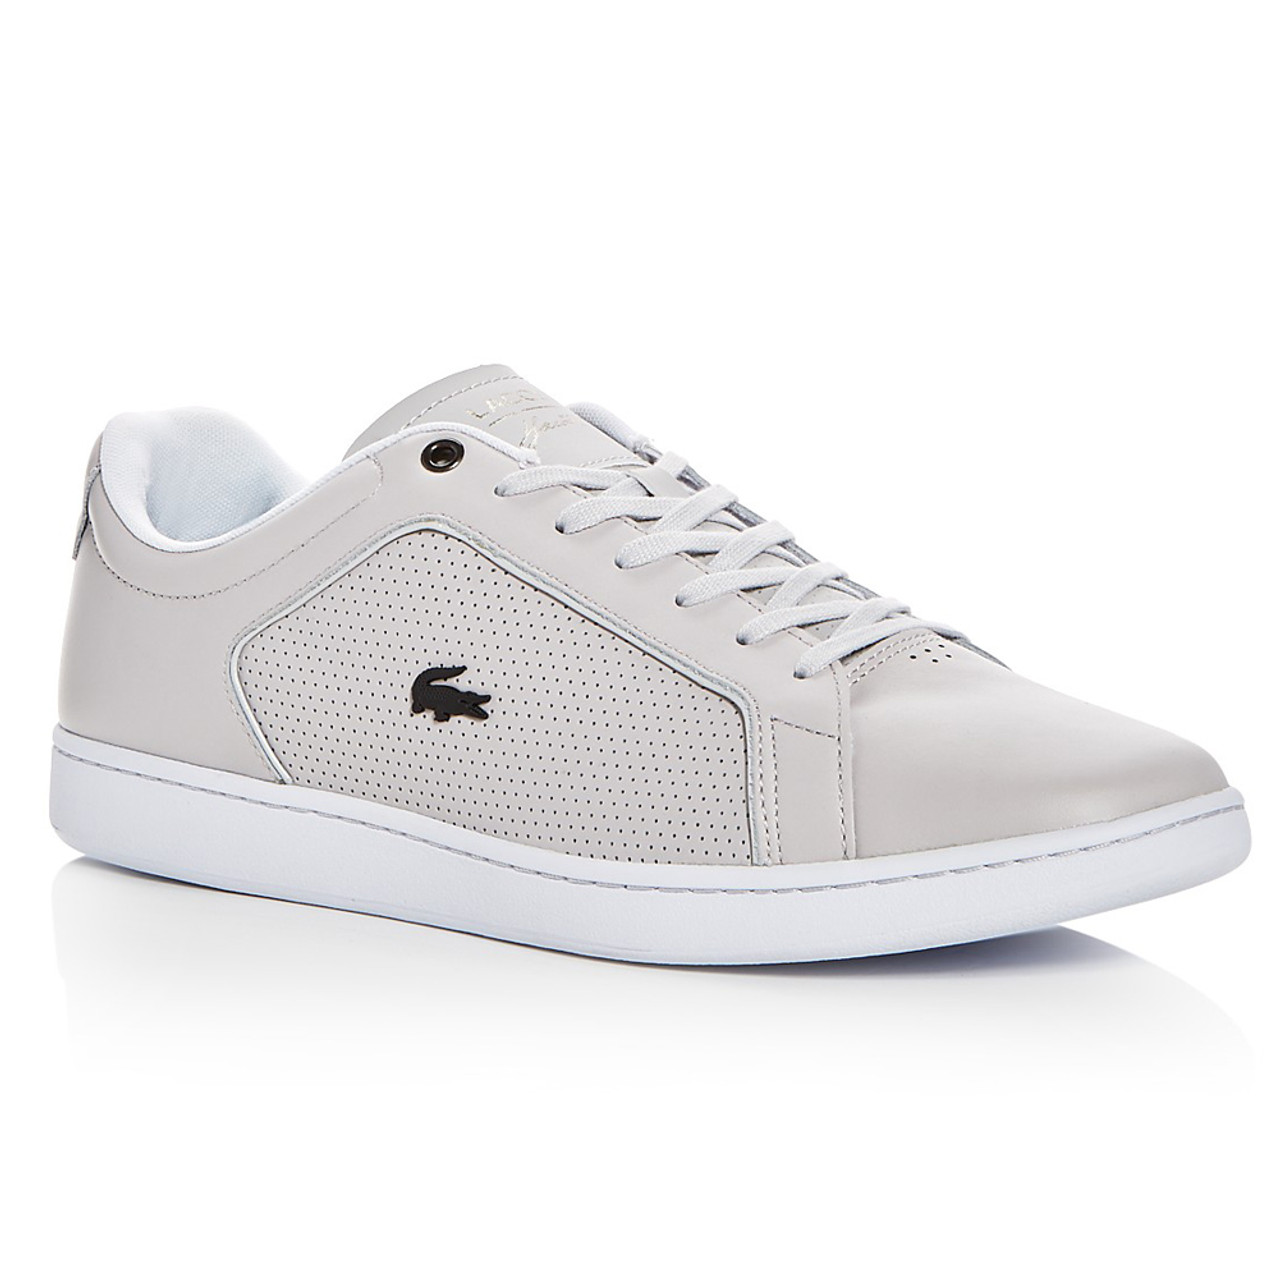 Lacoste Men's Carnaby Evo Leather Sneakers - Grey | Discount Lacoste ...